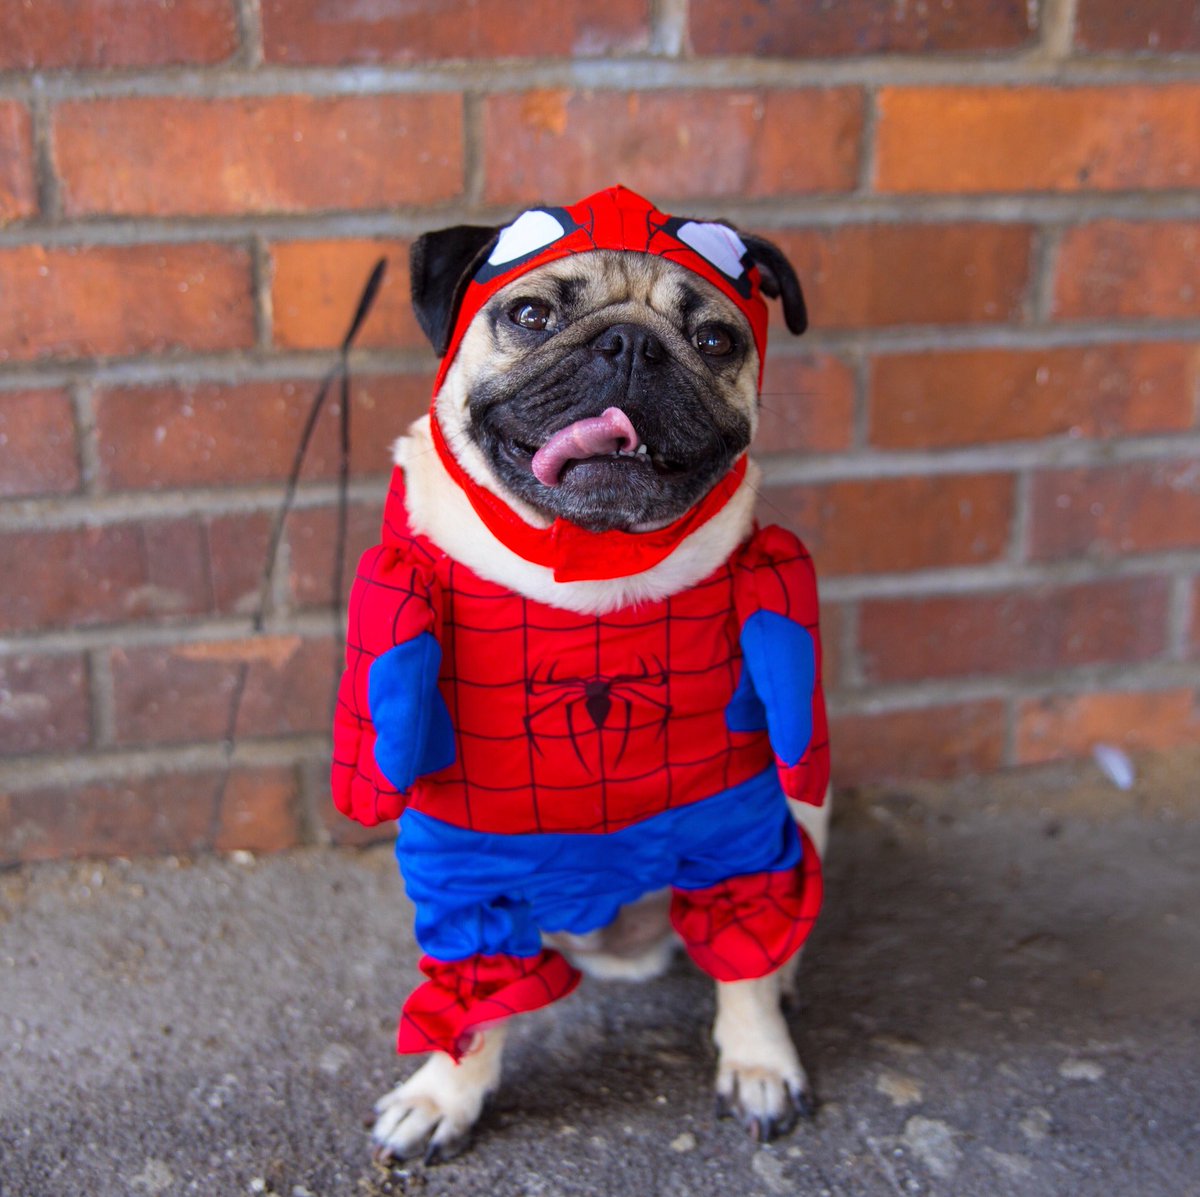 Spiderpug Spiderpug does whatever a pug does. Takes a nap, catches a treat, couch or lap is his favorite seat. Look out her comes Spiderpug